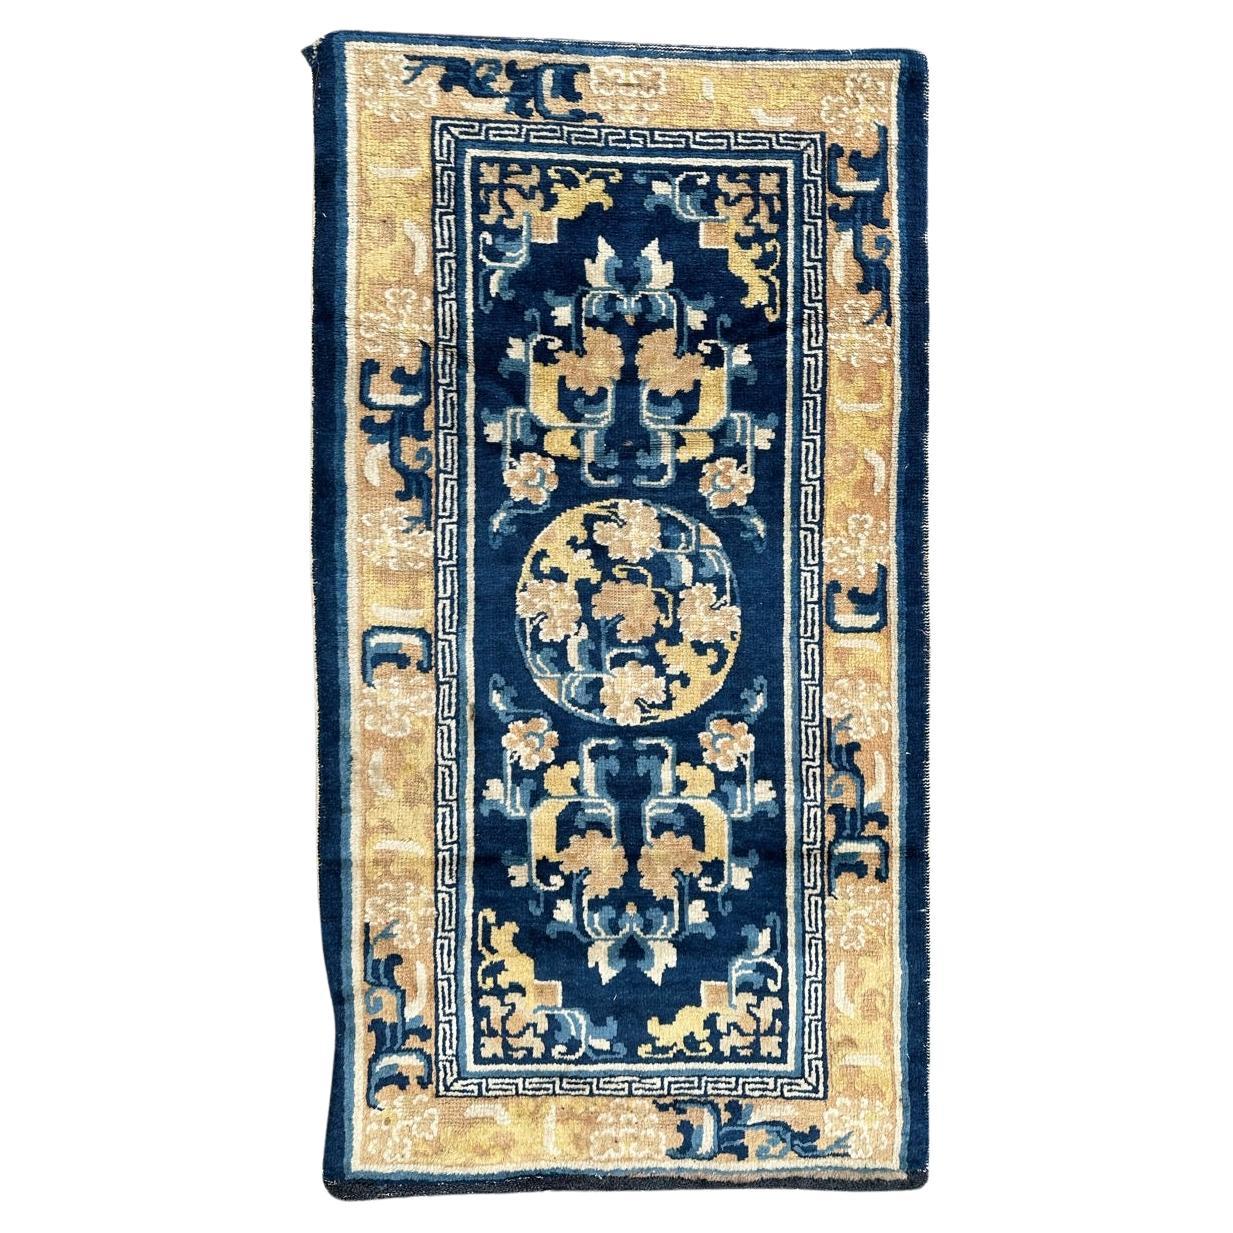 Bobyrug’s pretty rare antique Chinese rug For Sale